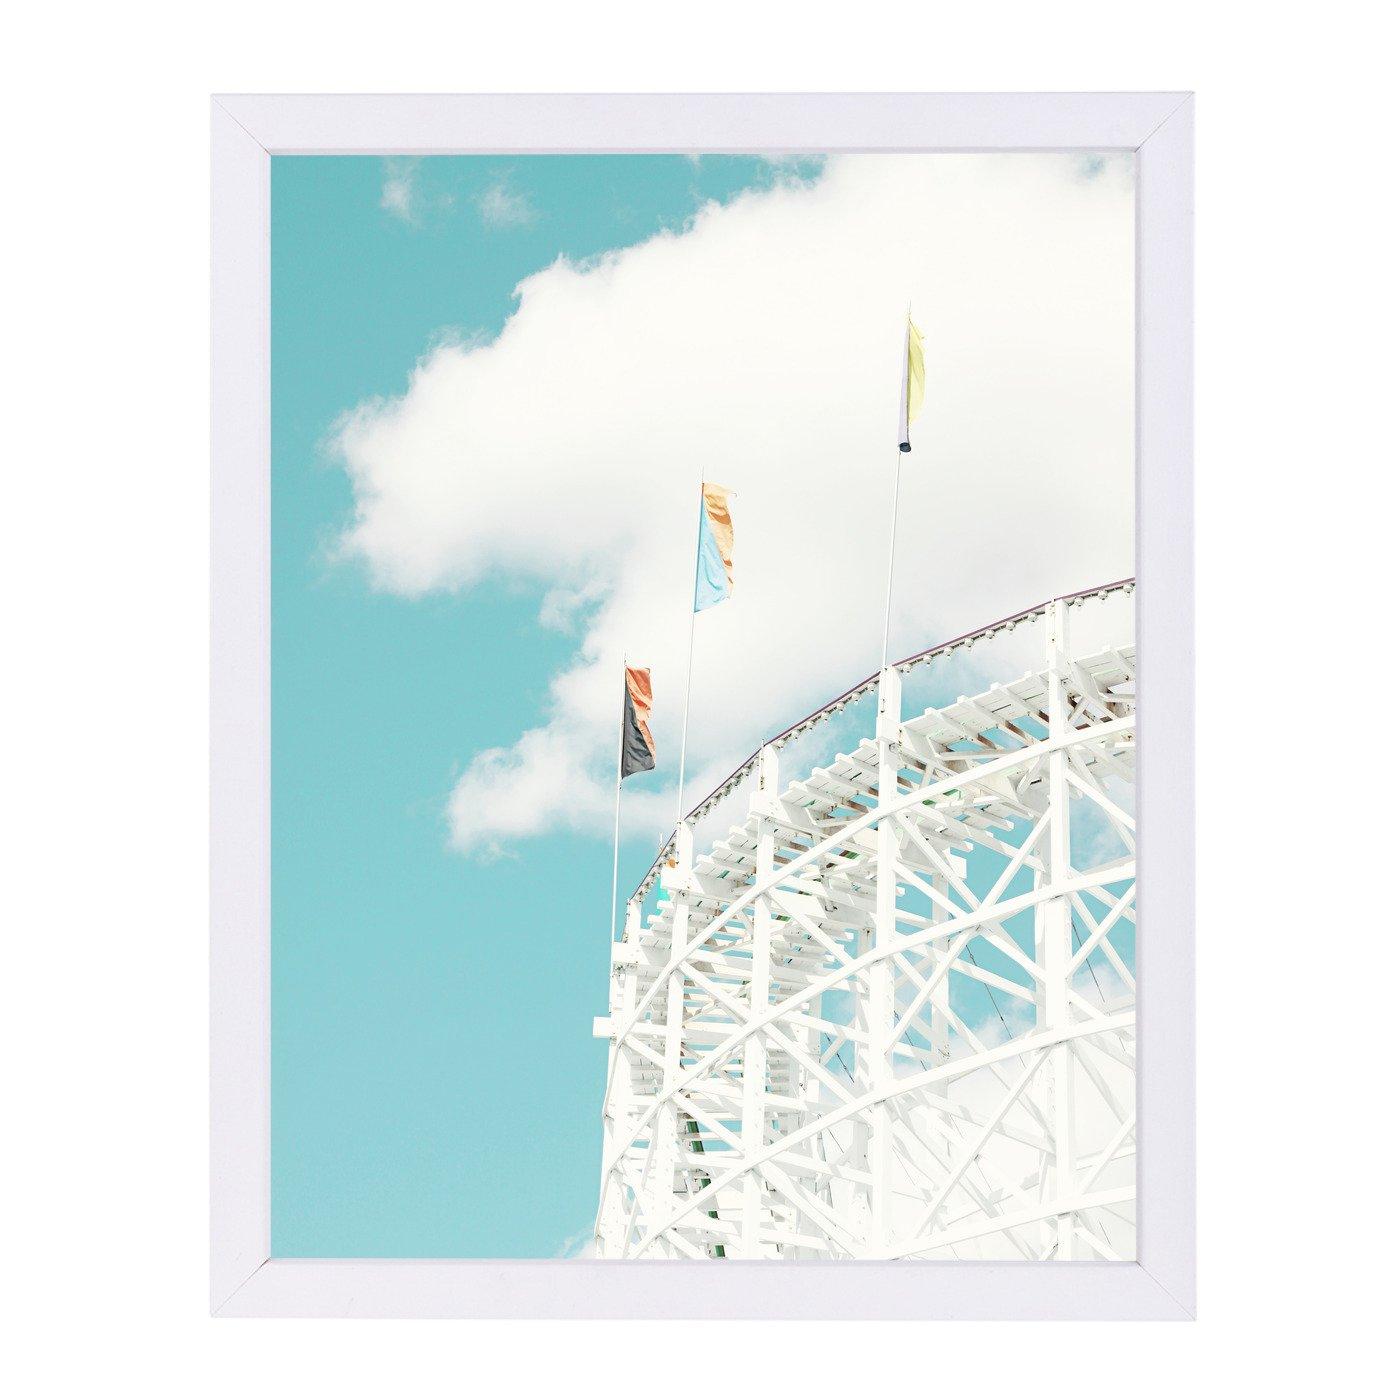 Roller Coaster By The Gingham Owl - Framed Print - Americanflat